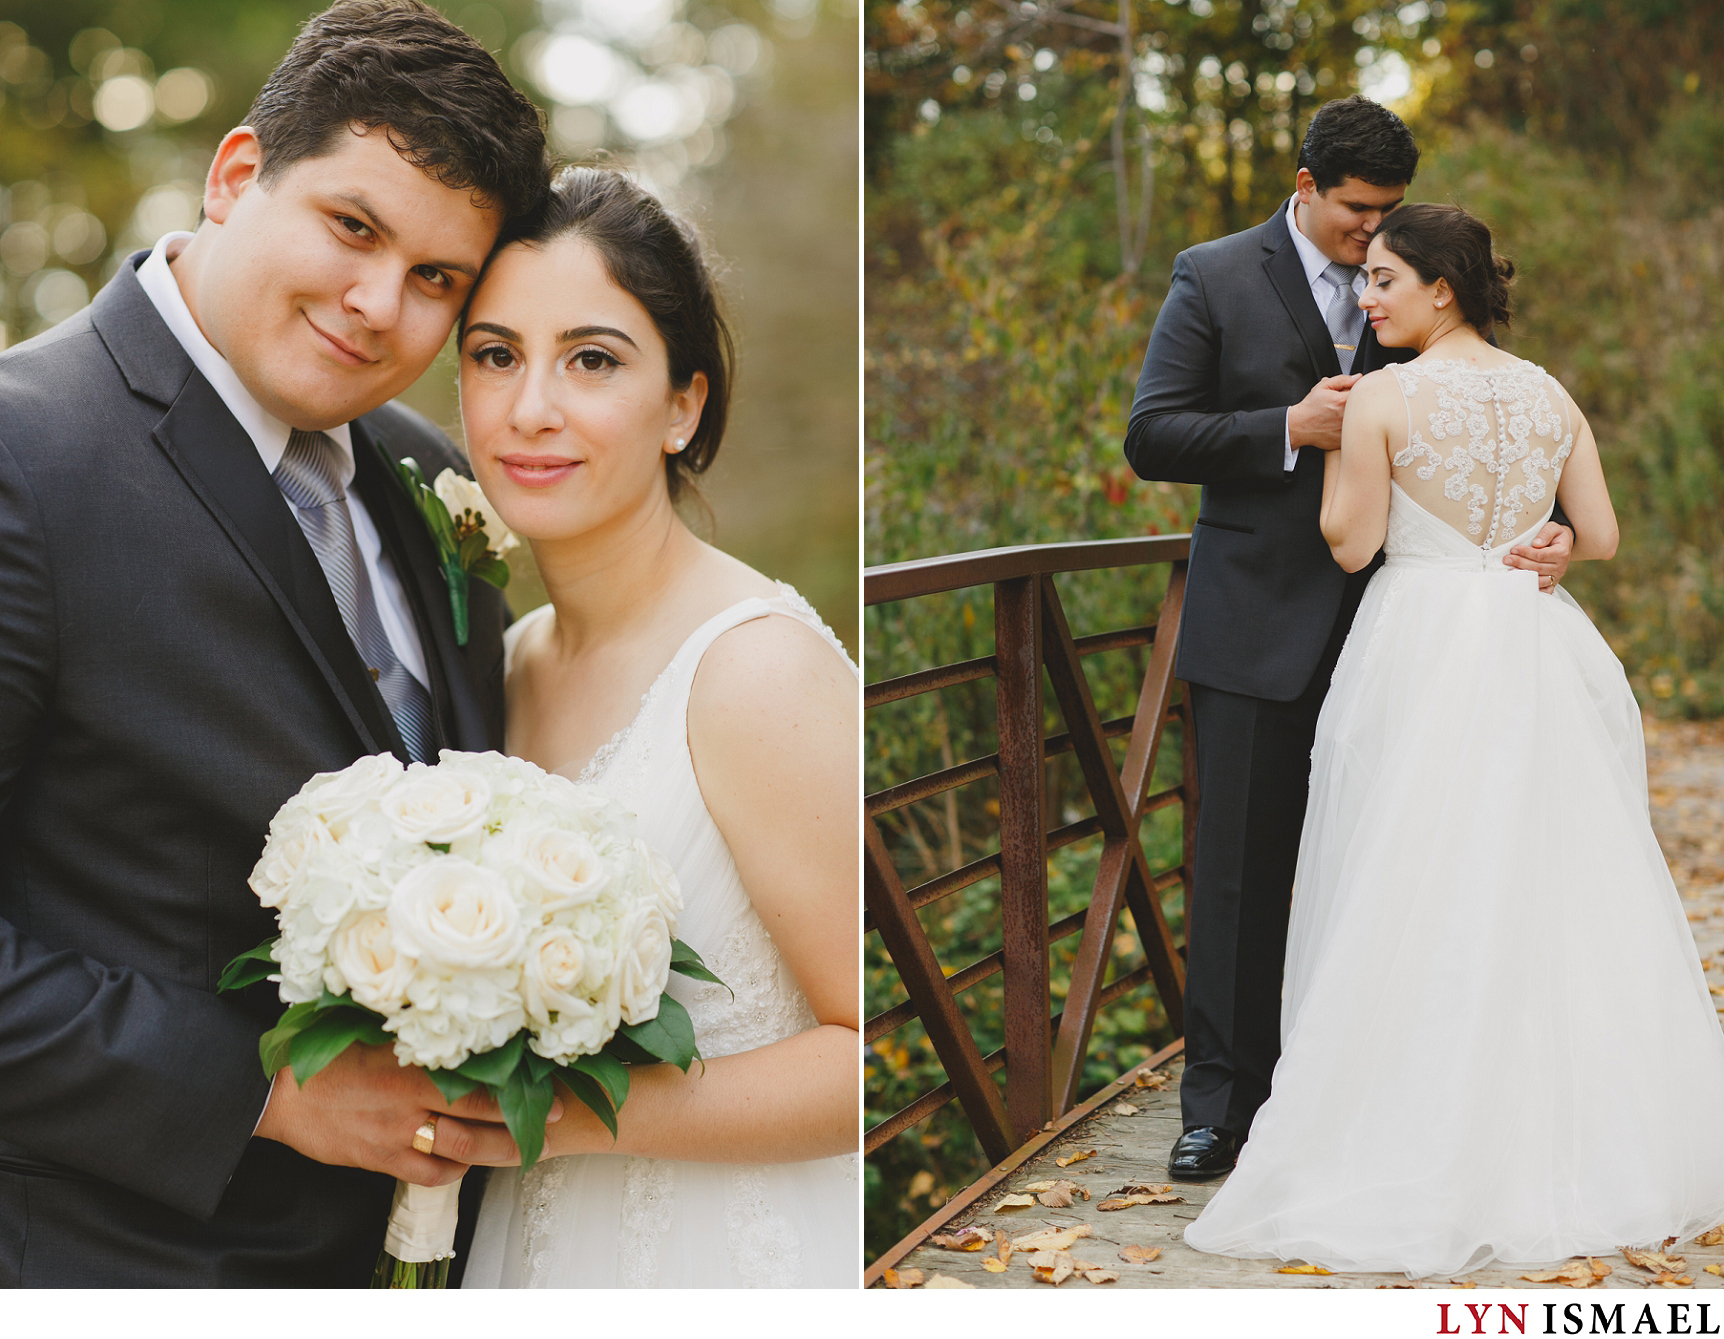 Classic, elegant portraits of a bride and groom photographed in Naylon Parkette by Vaughan wedding photojournalist.